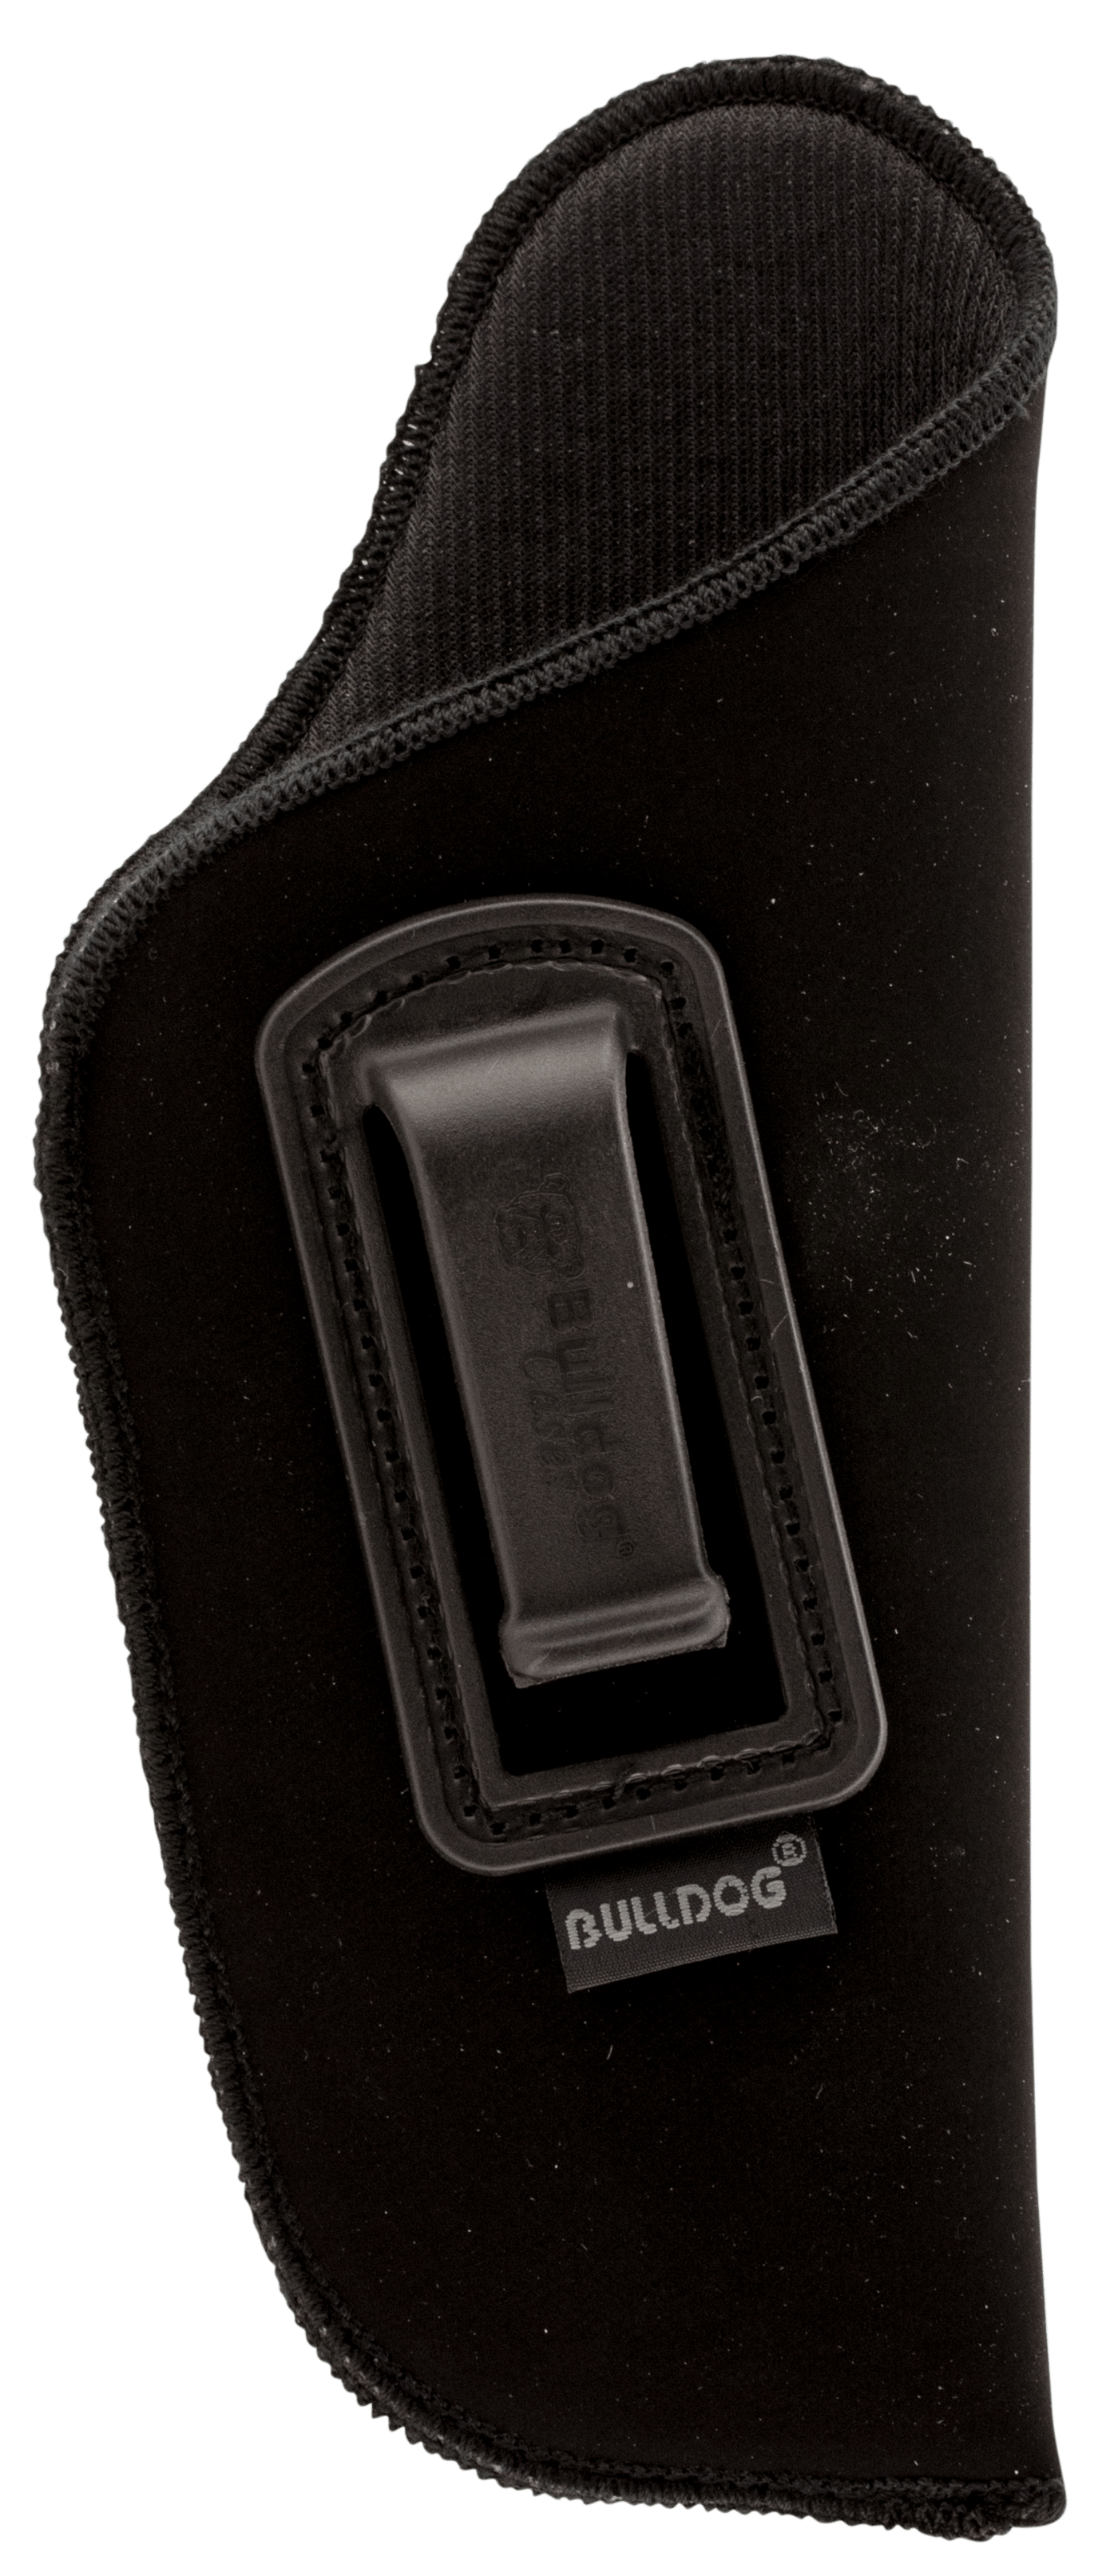 Bulldog Bulldog Deluxe Inside Pants Holsters Back Rh Sub Compact With 2 To 3 In. Barrels Firearm Accessories